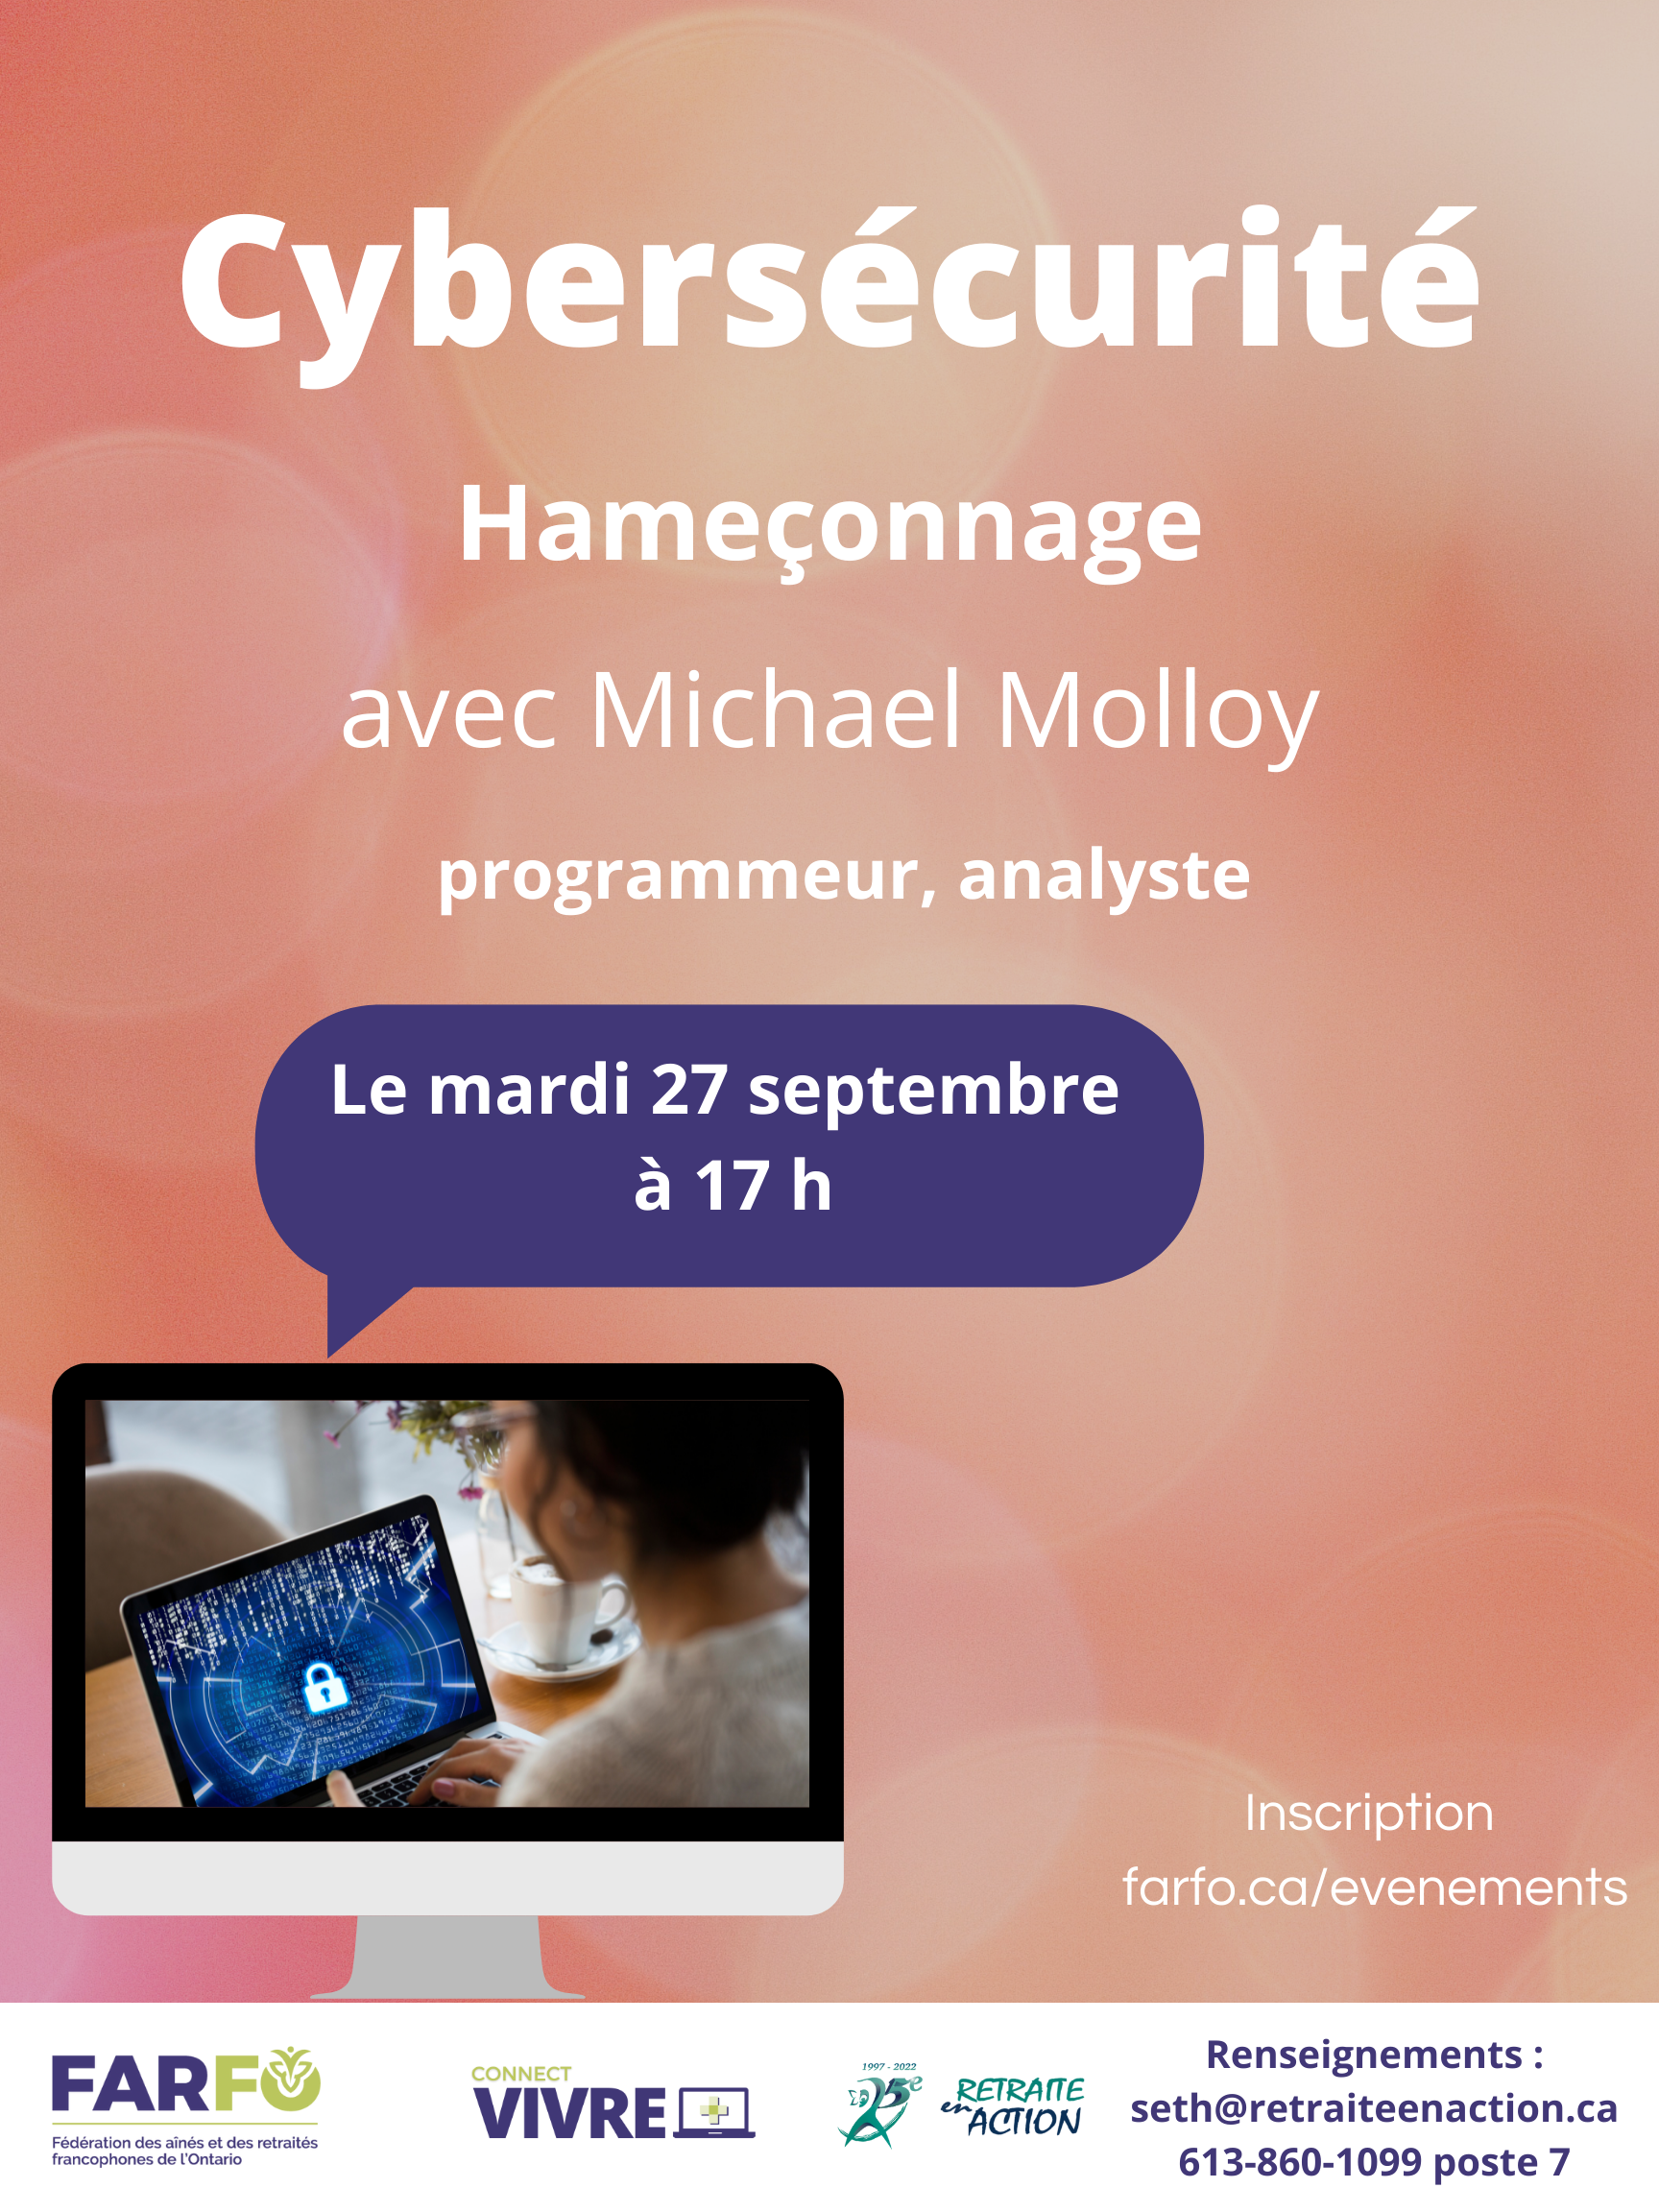 Cybersecurite Hameconnage 2